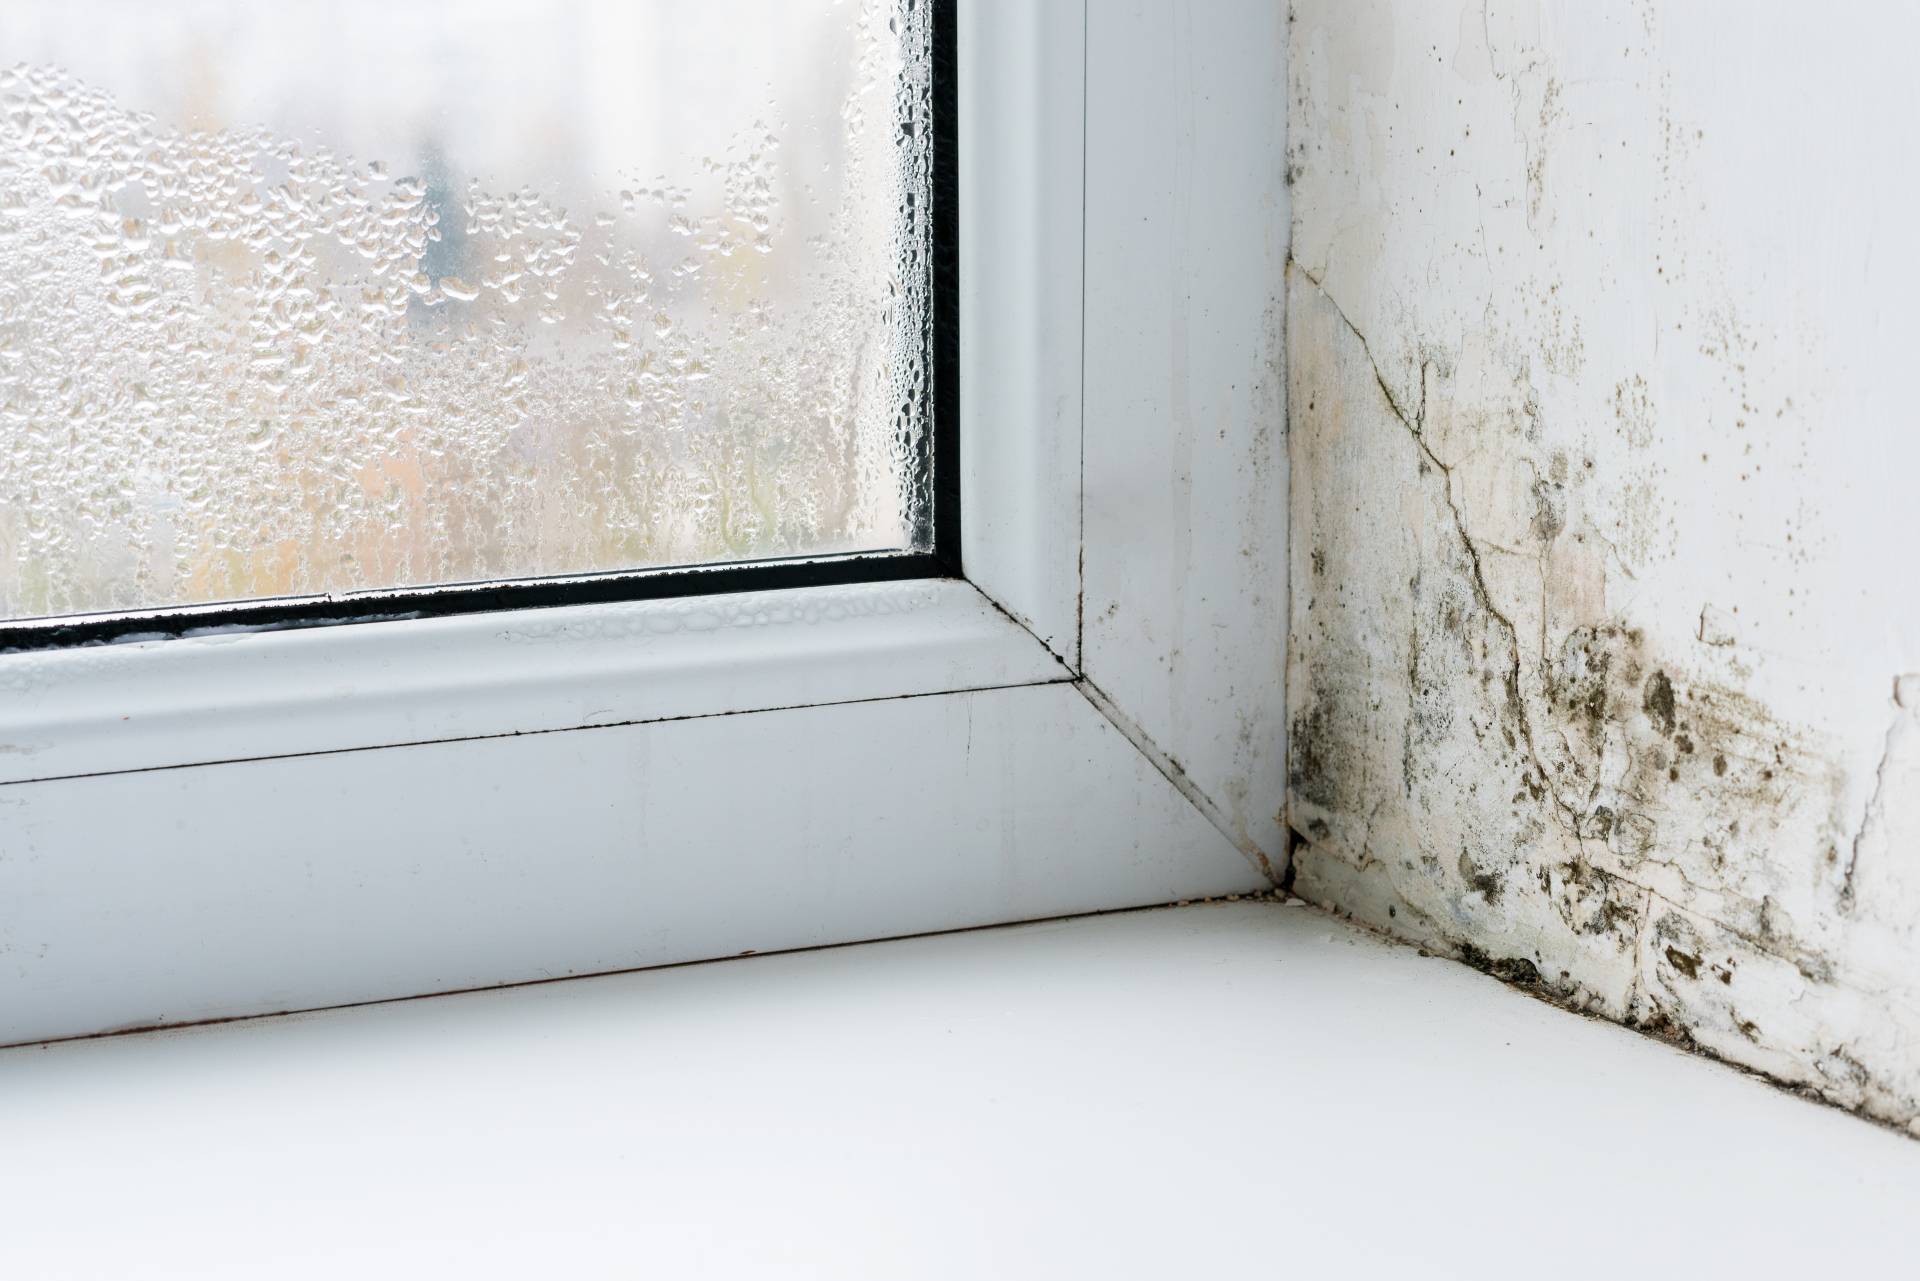 Window condensation and damp wall damage